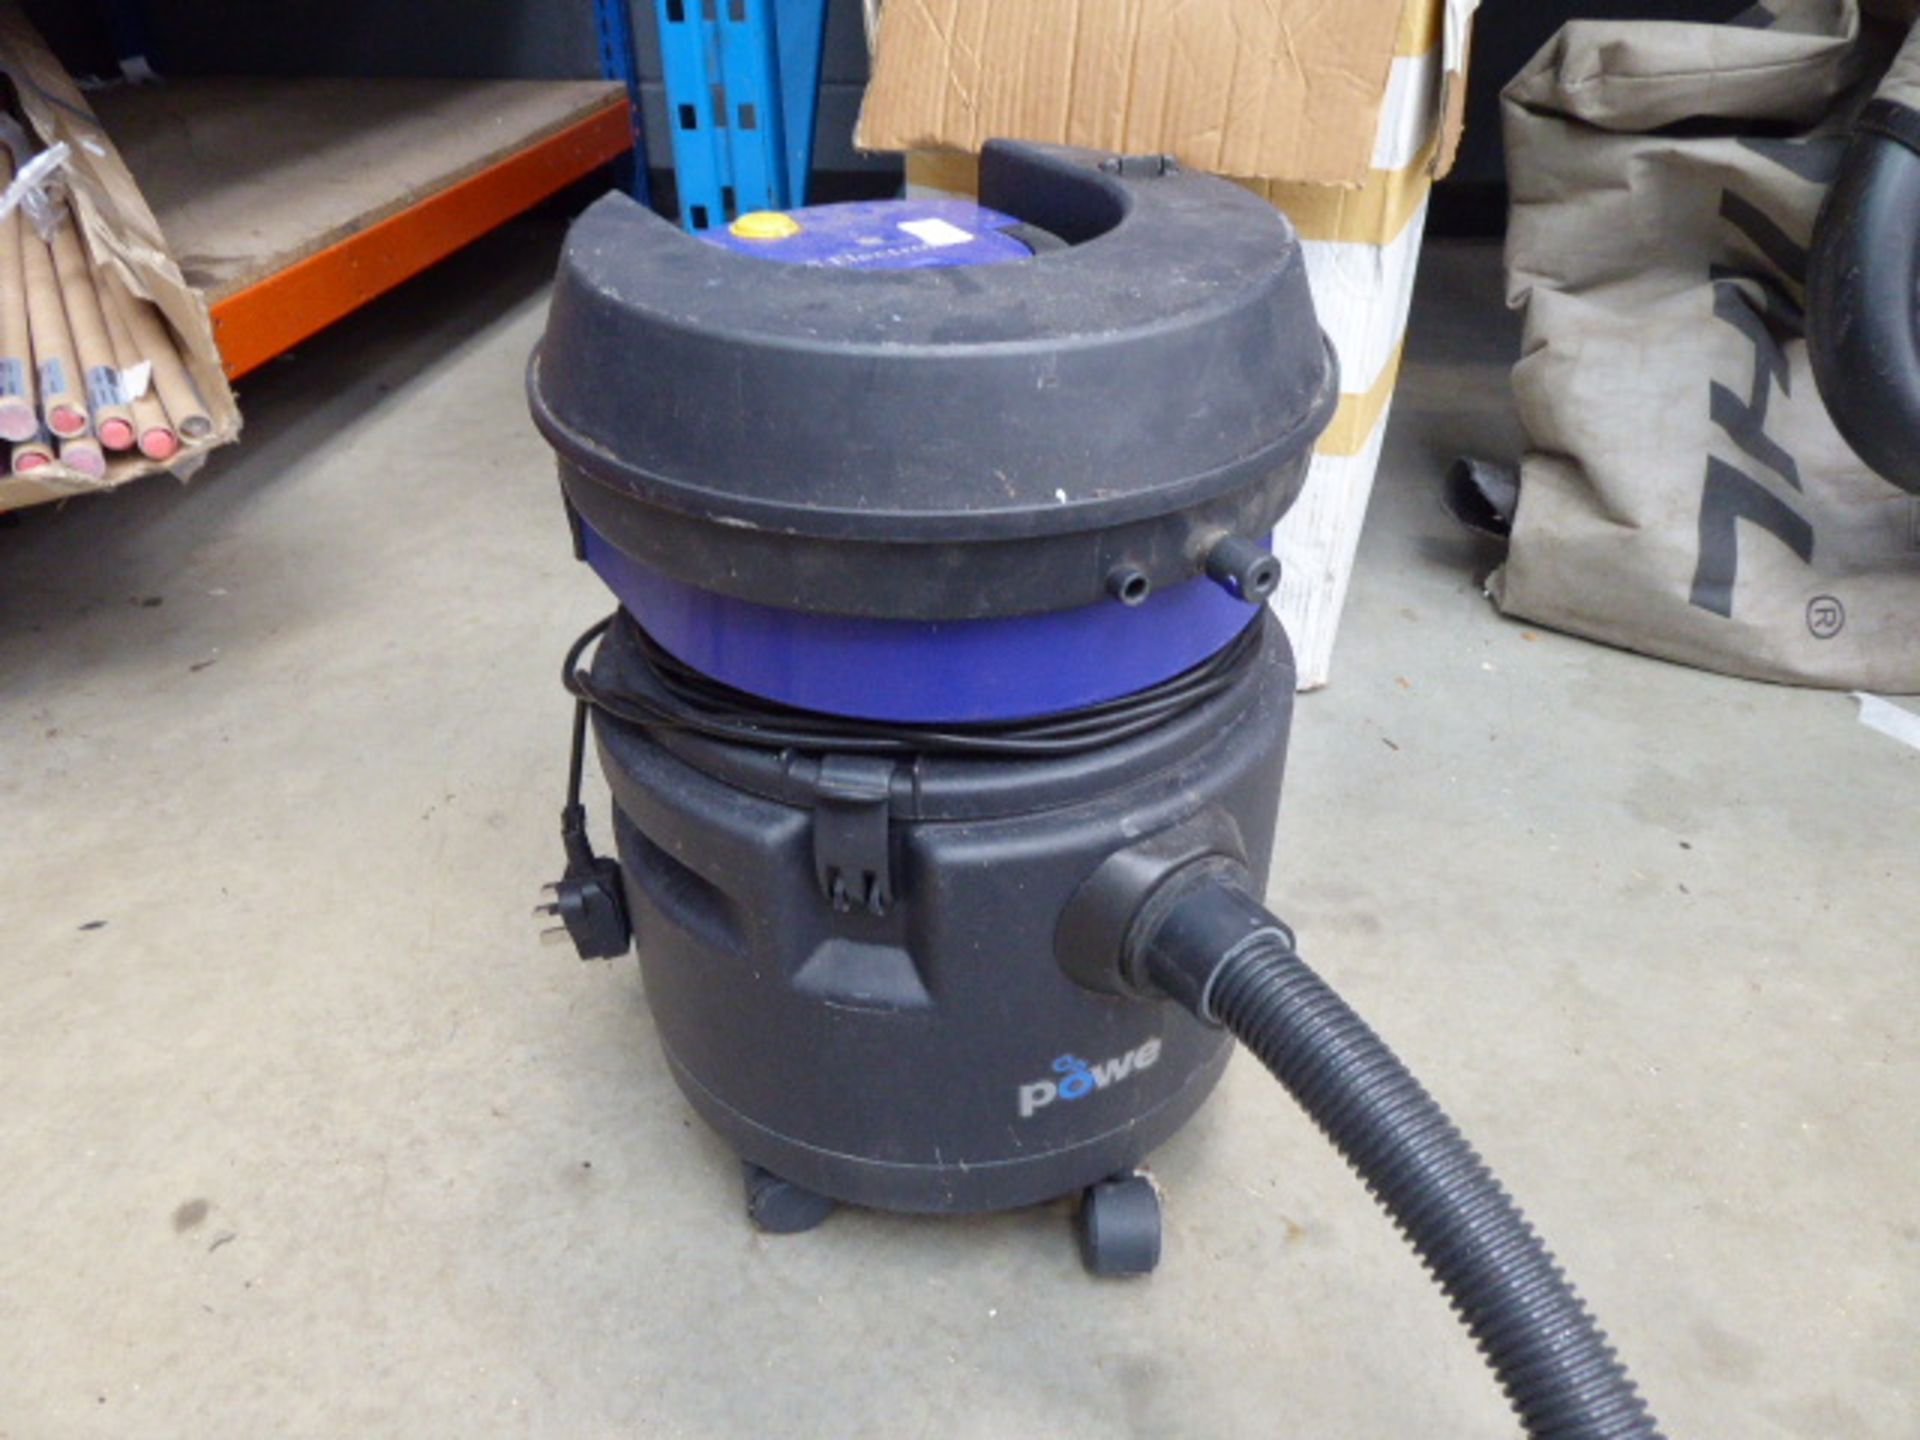 Blue boxed electric vacuum cleaner